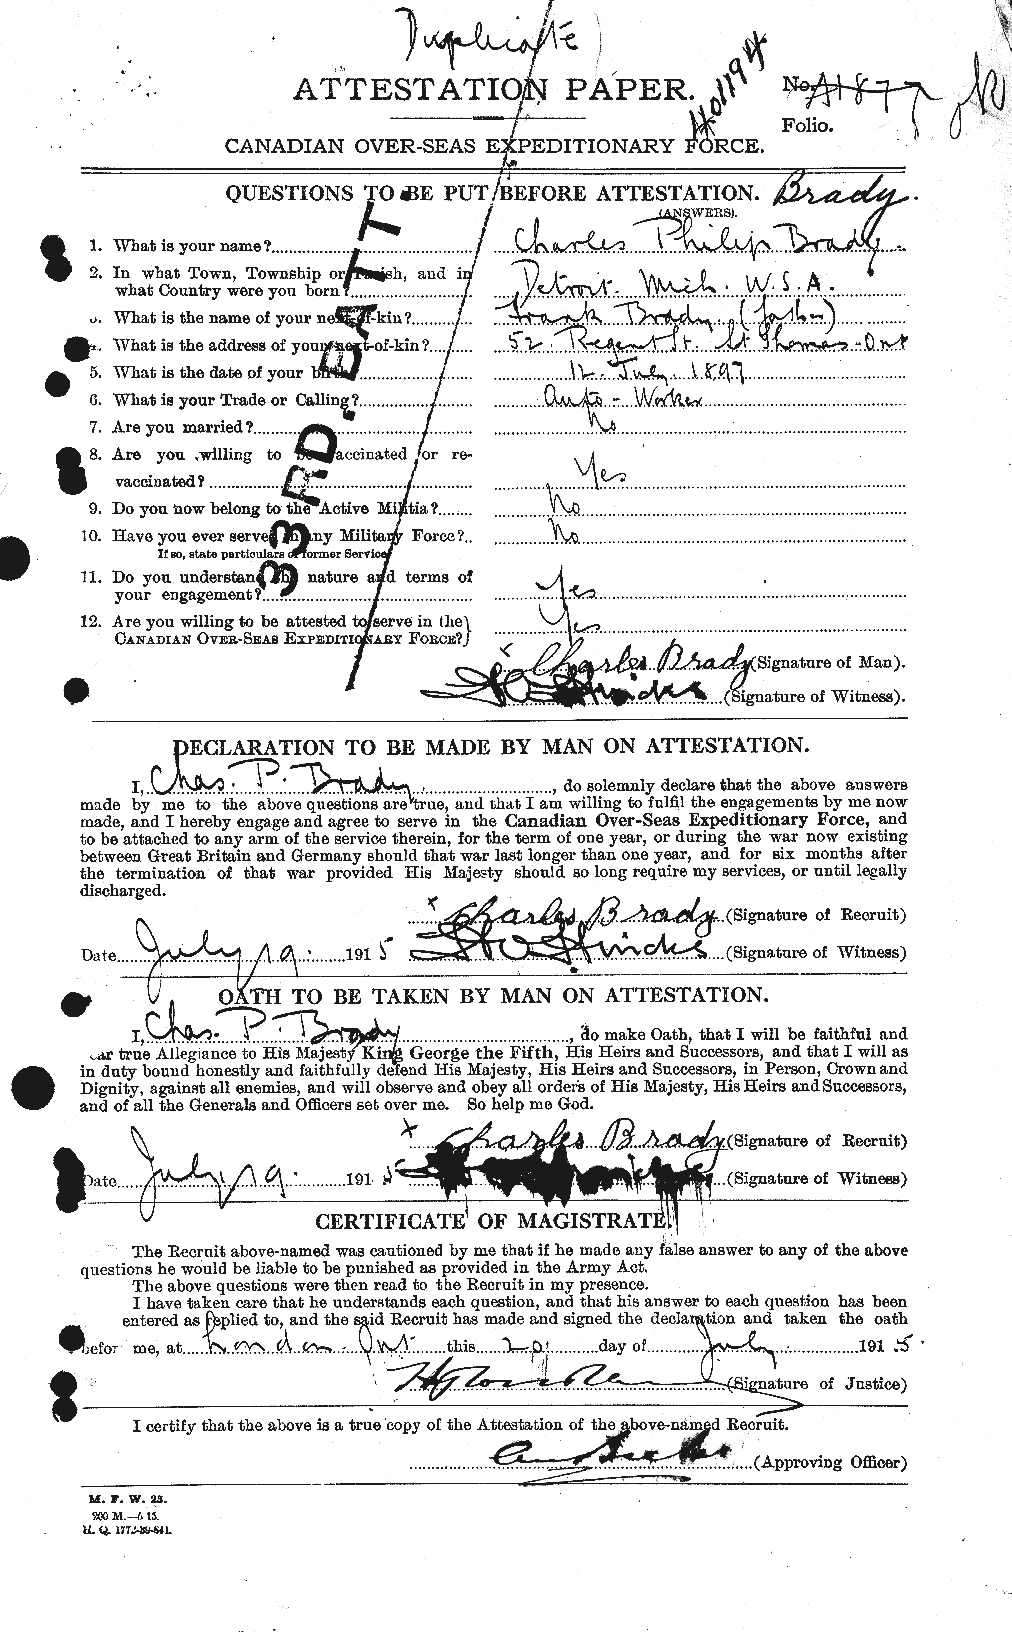 Personnel Records of the First World War - CEF 257123a